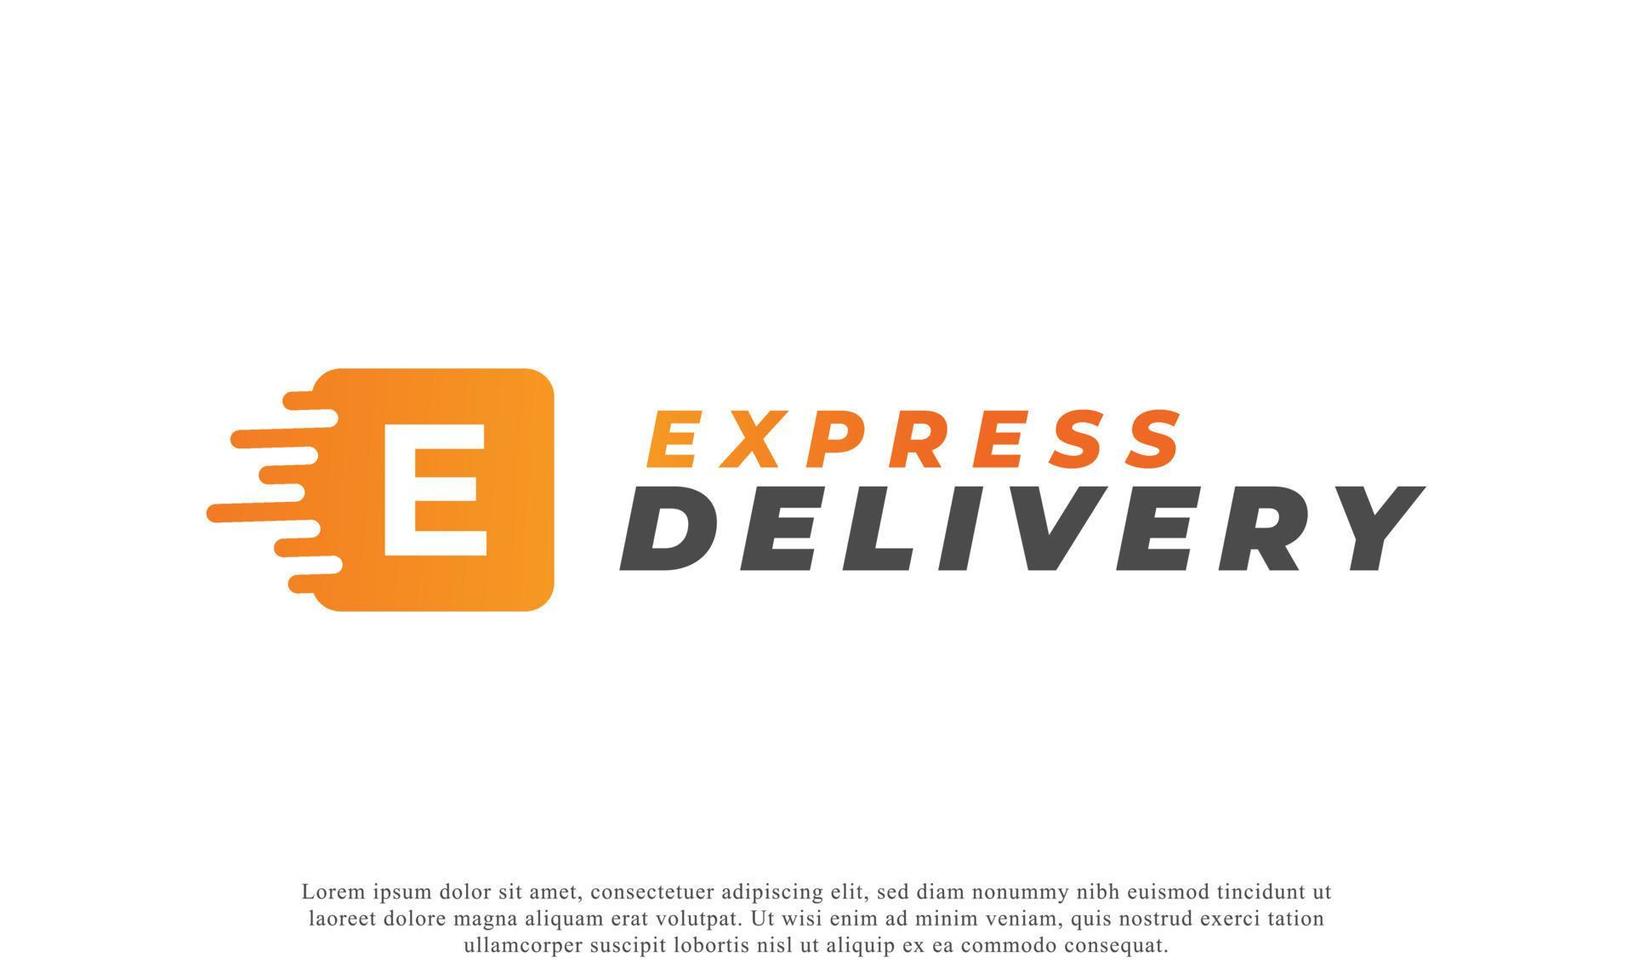 Creative Initial Letter E Logo. Orange Shape E Letter with Fast Shipping Delivery Truck Icon. Usable for Business and Branding Logos. Flat Vector Logo Design Ideas Template Element